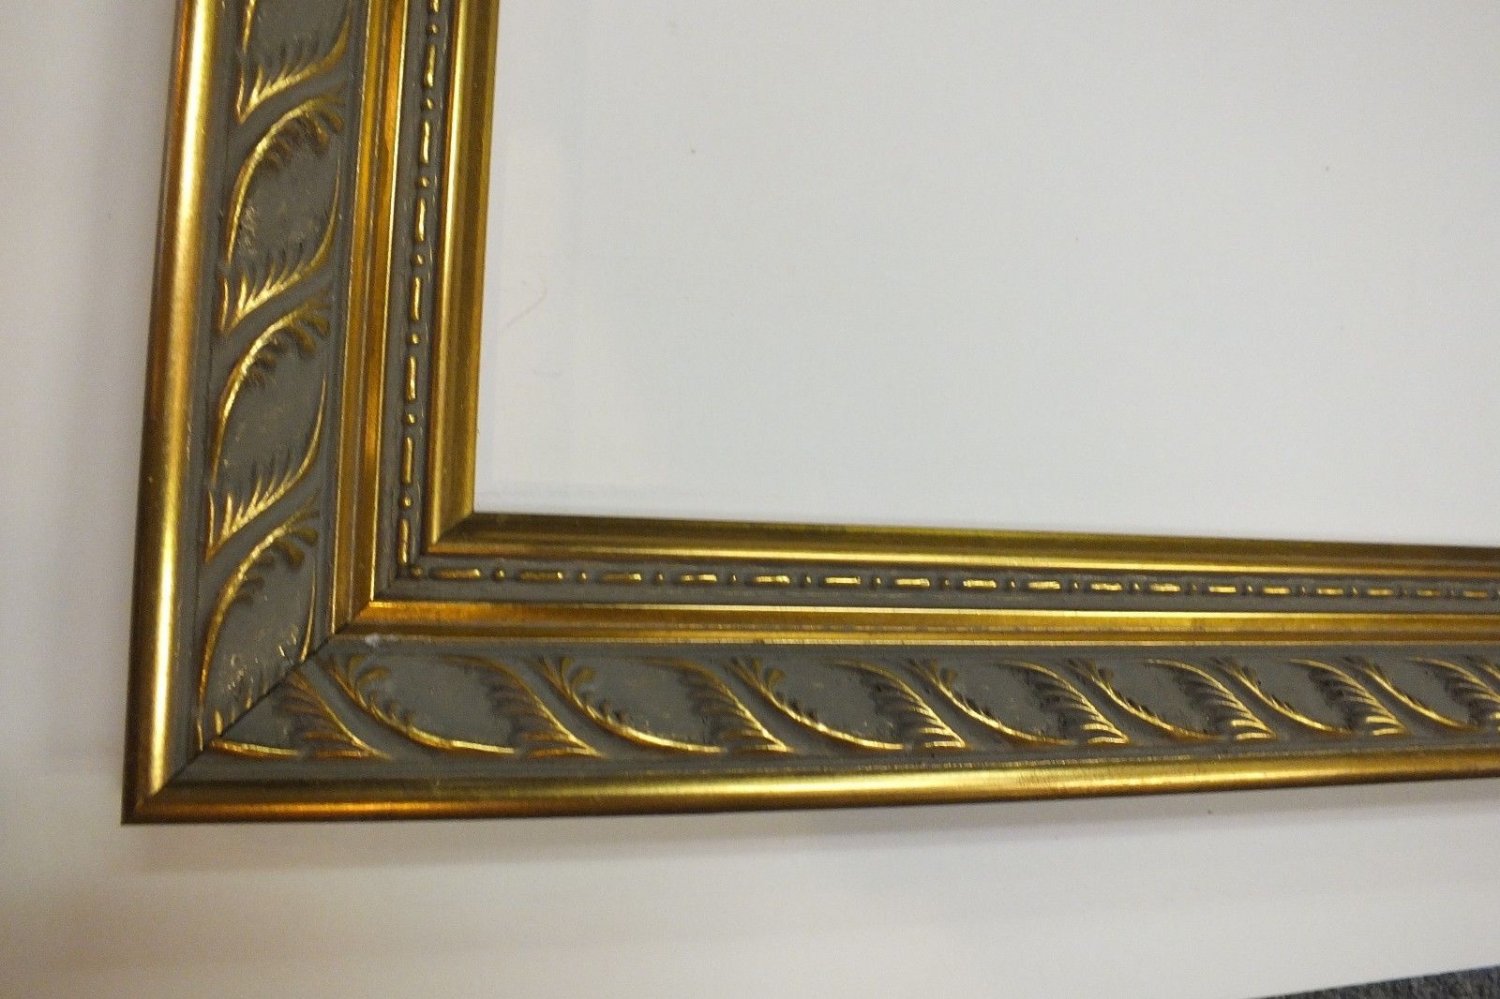 16 x 20 Ornate Gold leaf Wood Picture Frame Sale Free Shipping